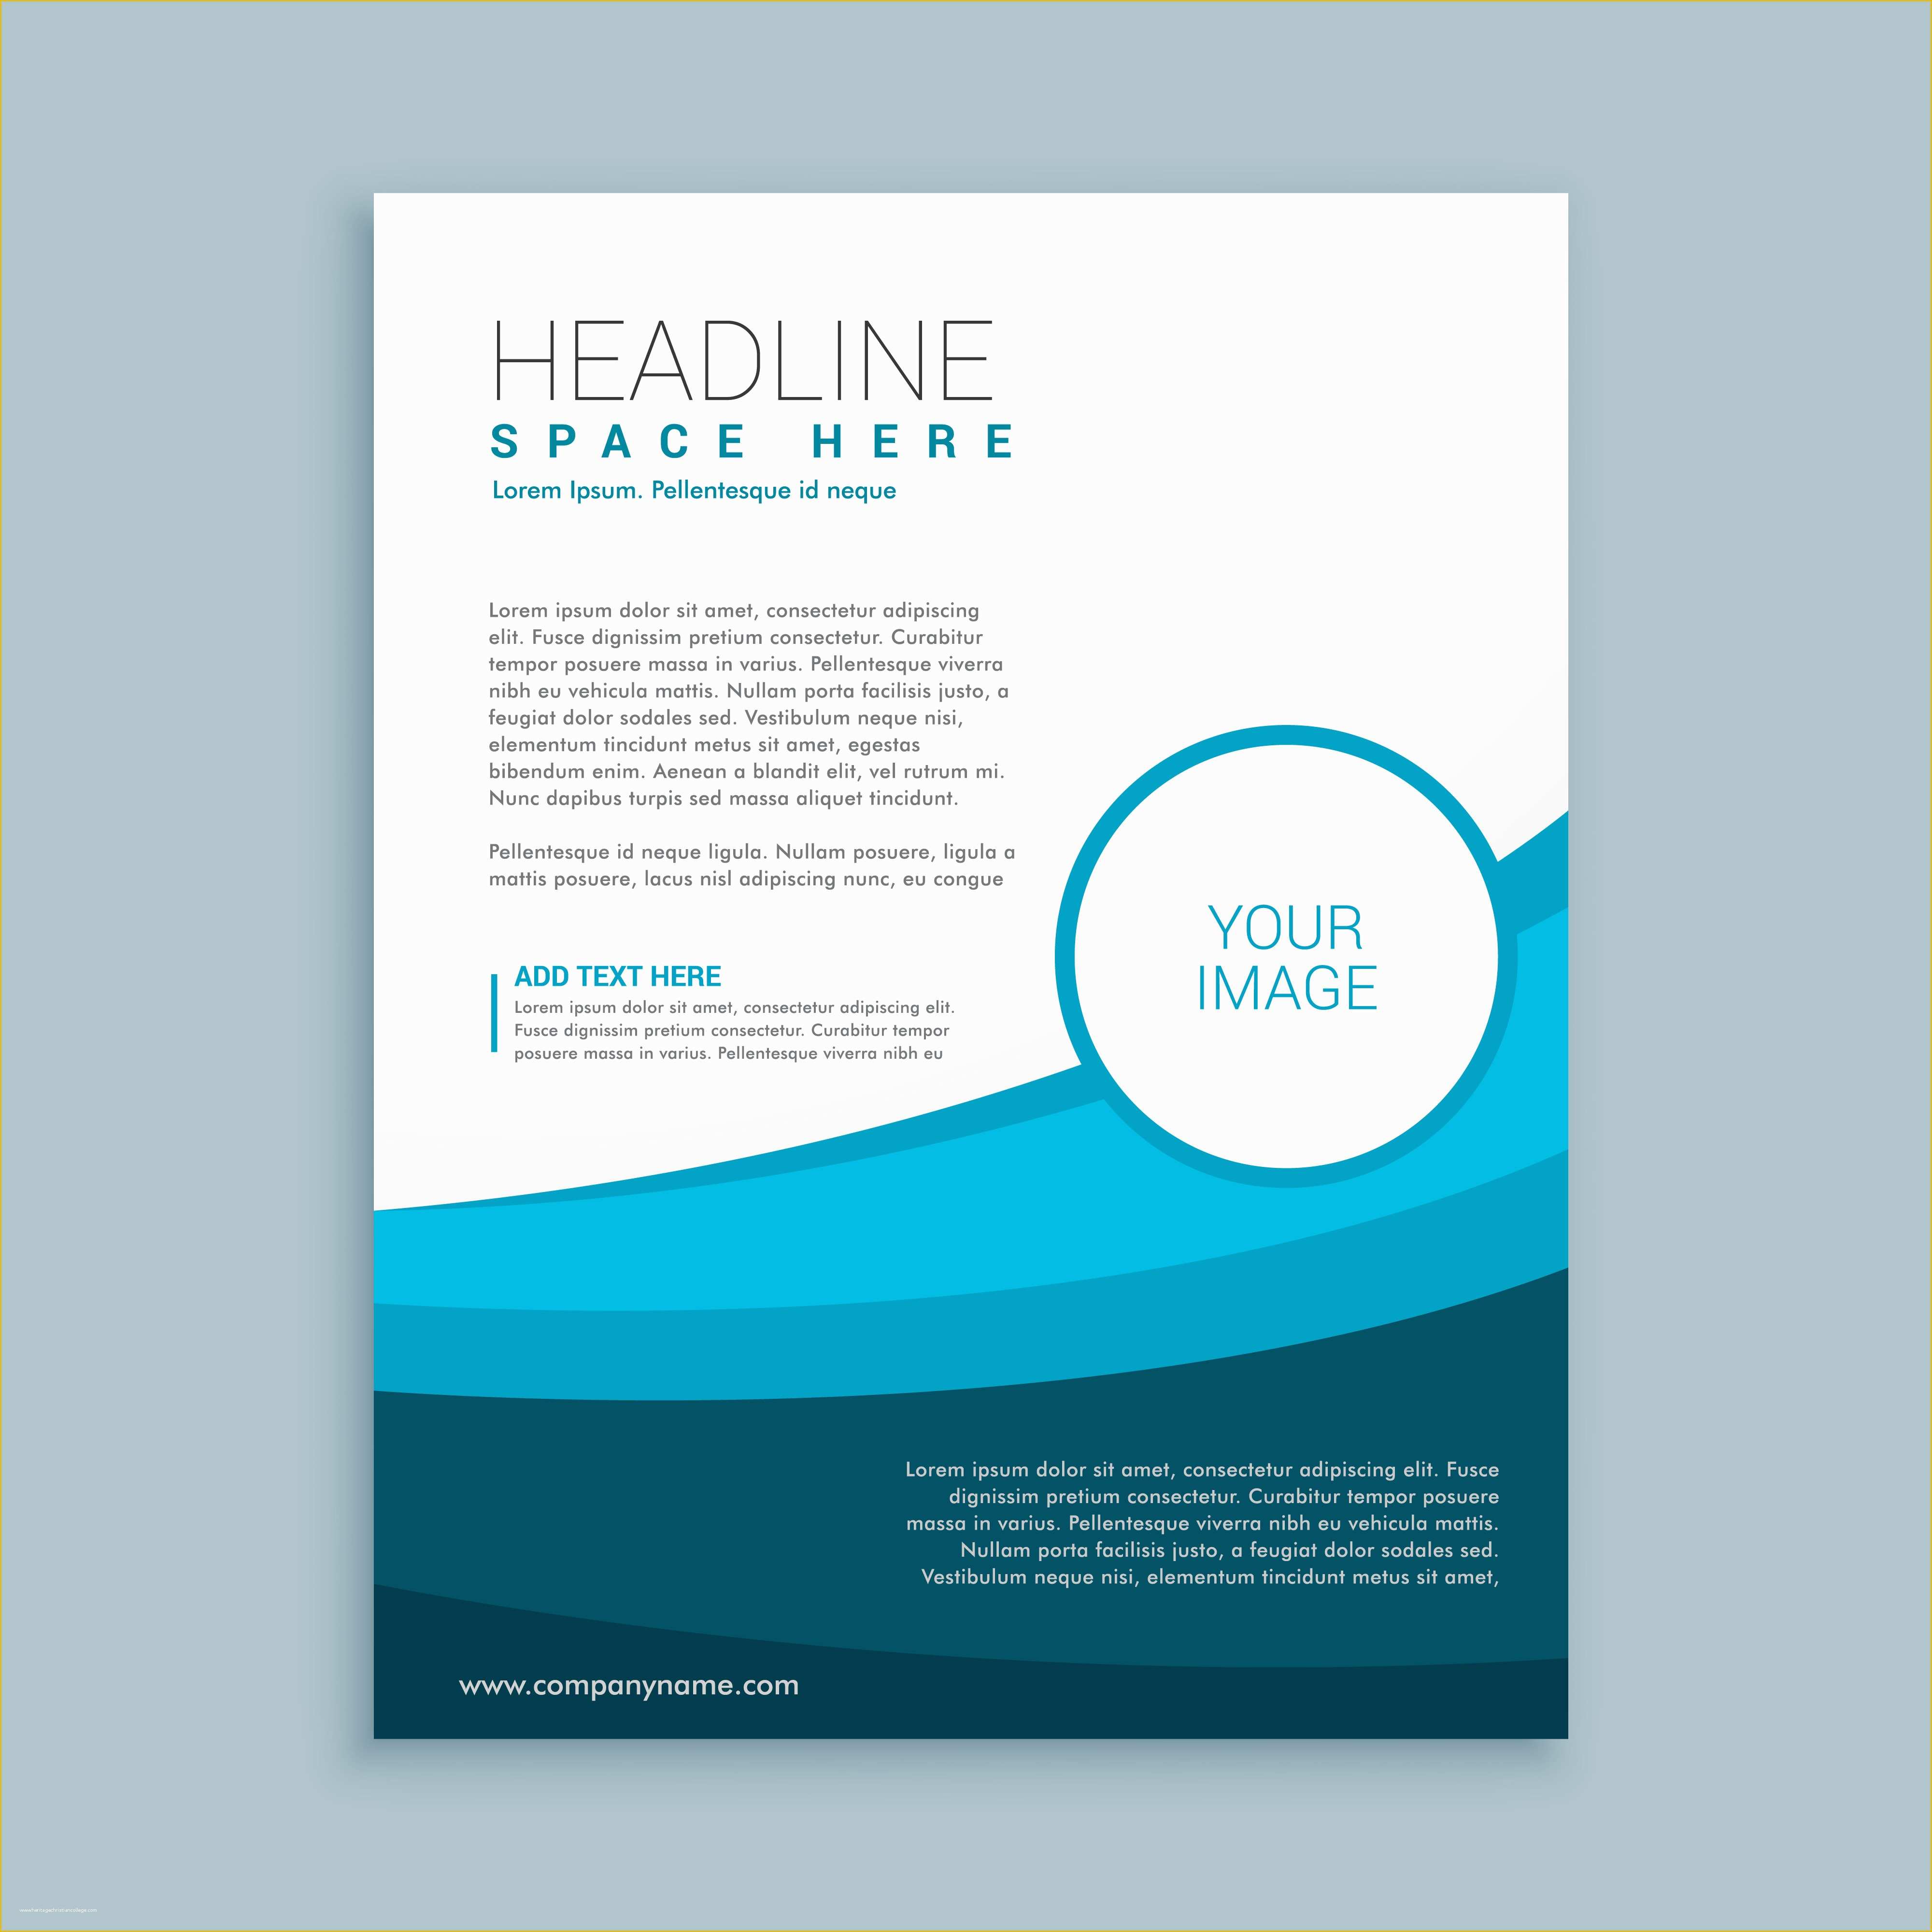 Business Prospectus Template Free Of Modern Business Brochure Template Design Download Free